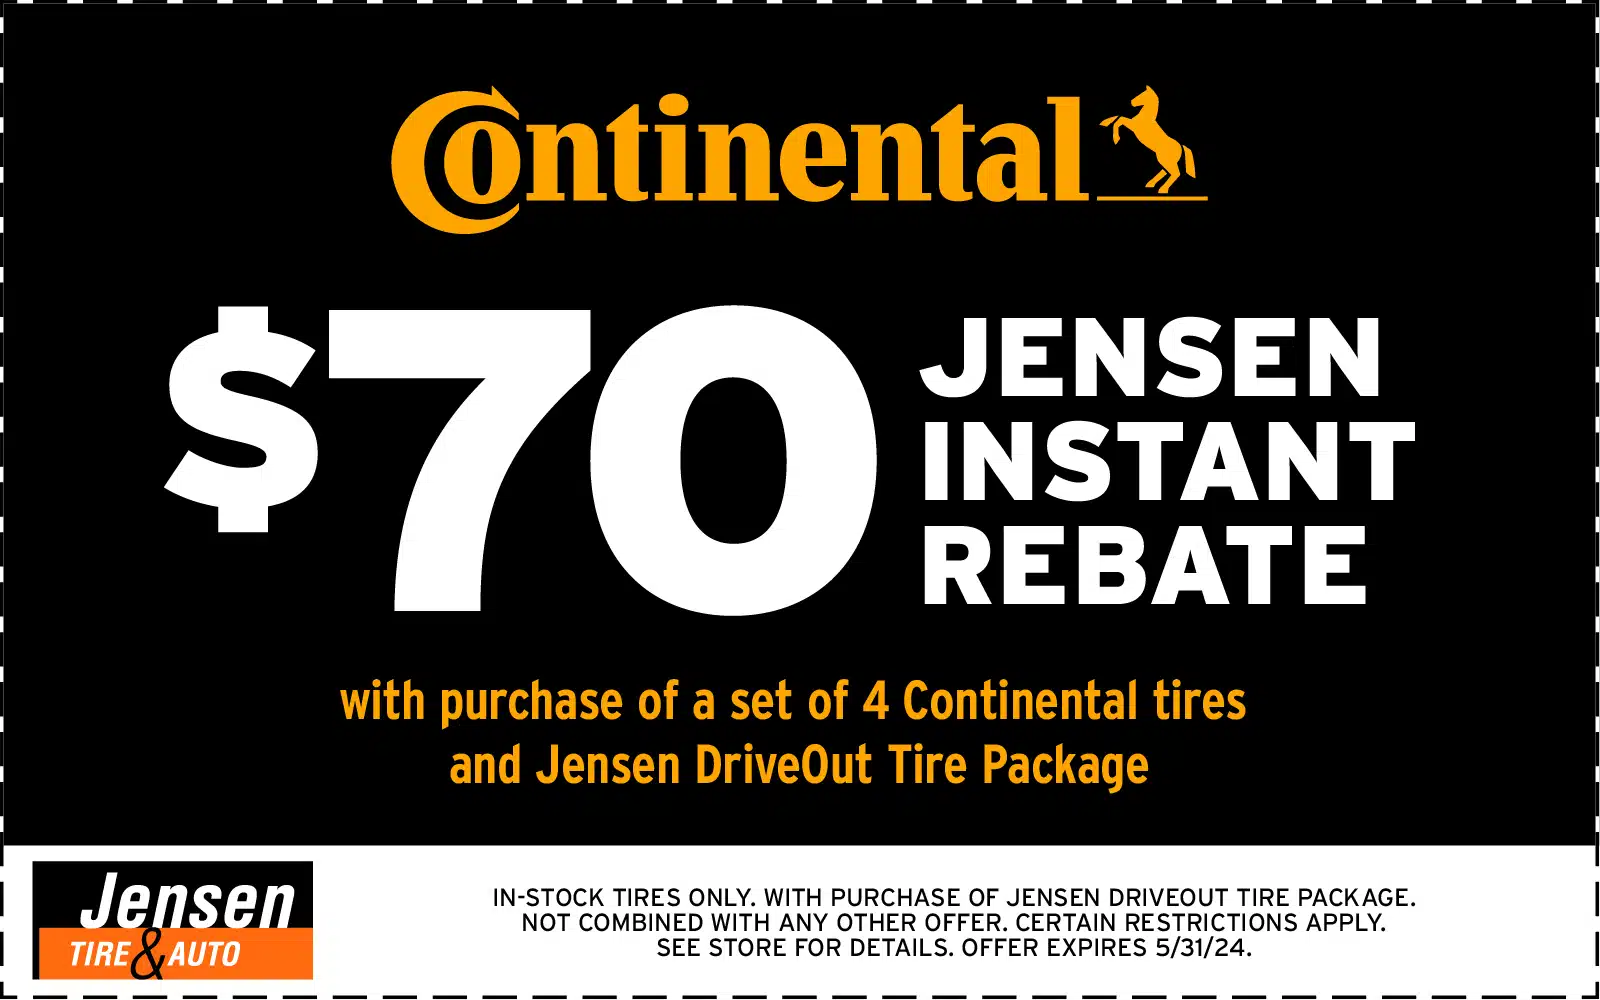 tires_continental_050124-052124